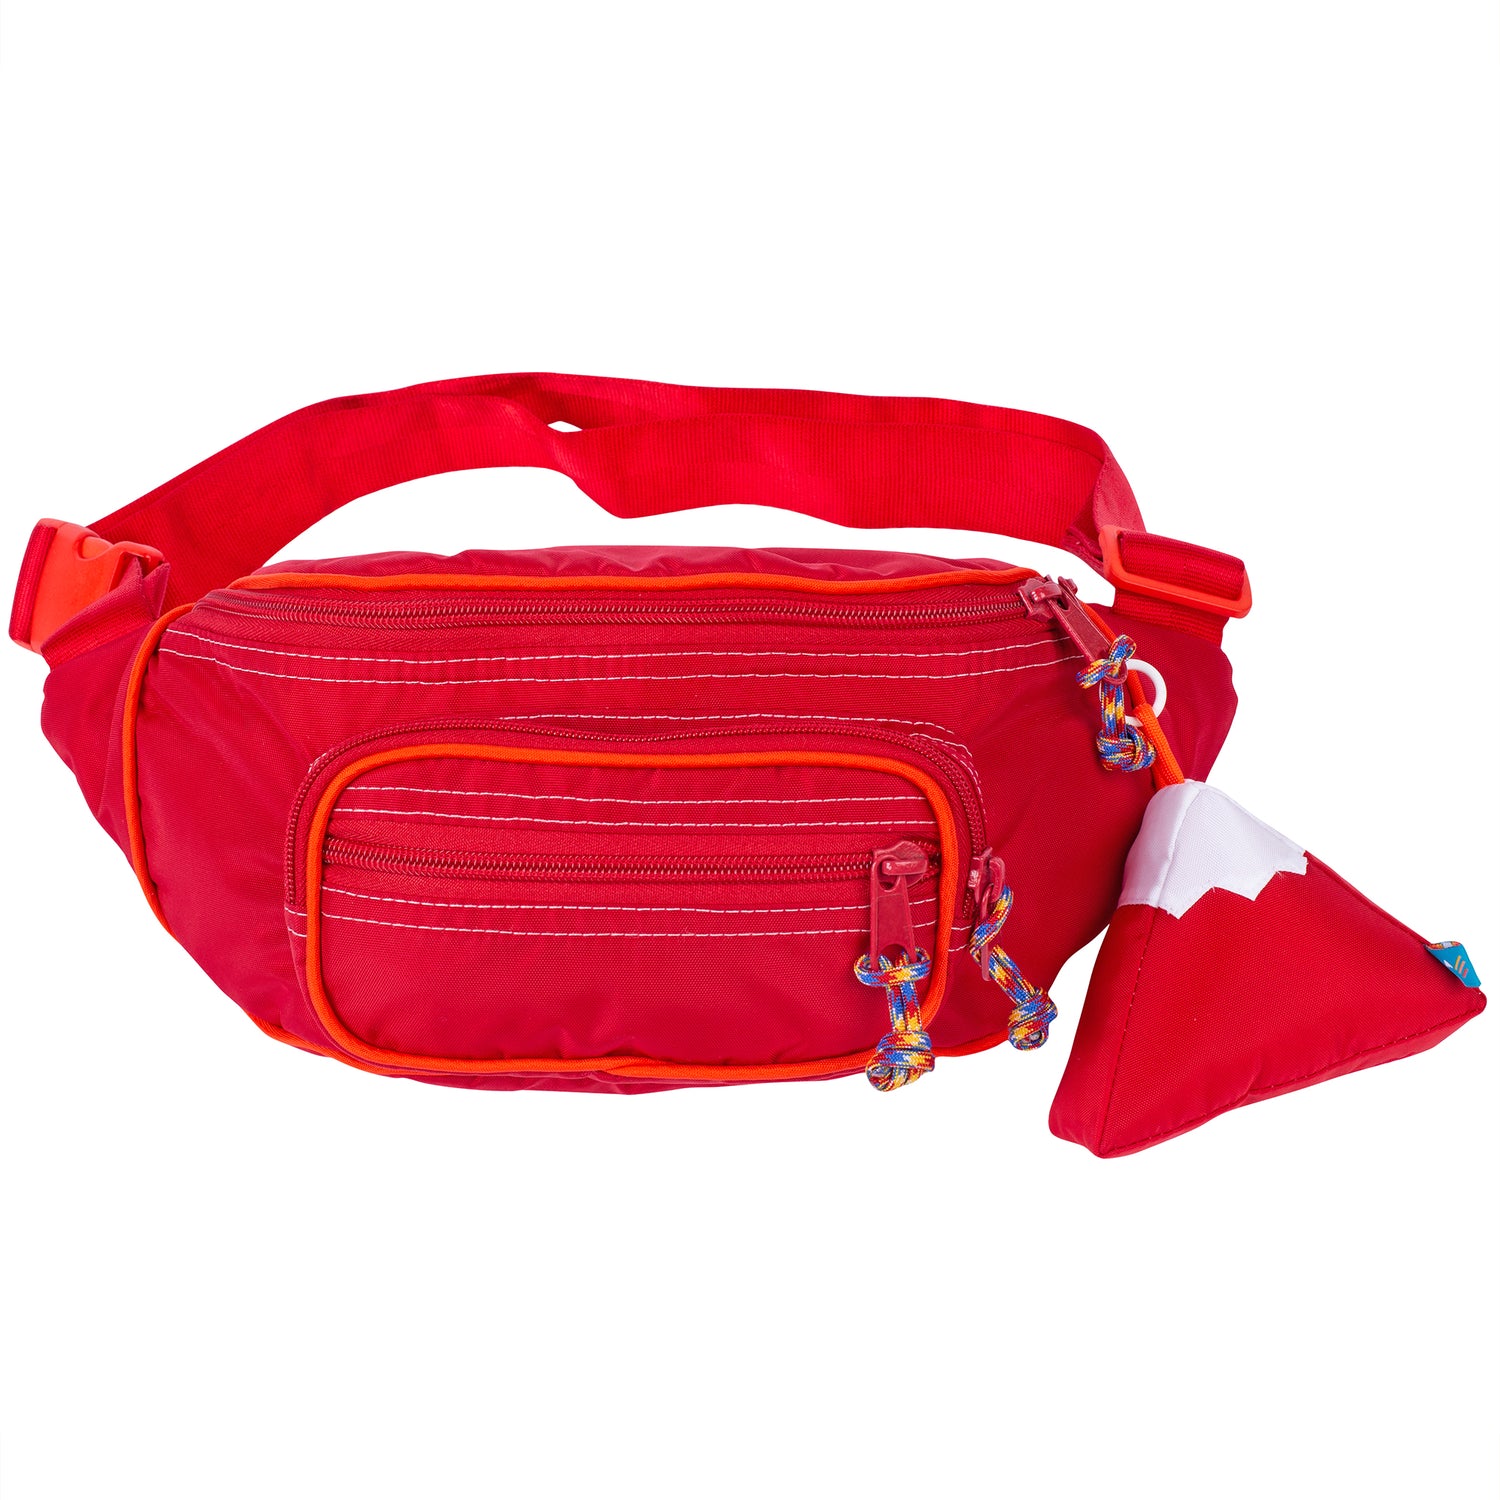 Large fanny pack sling in a red color with a mountain design keychain